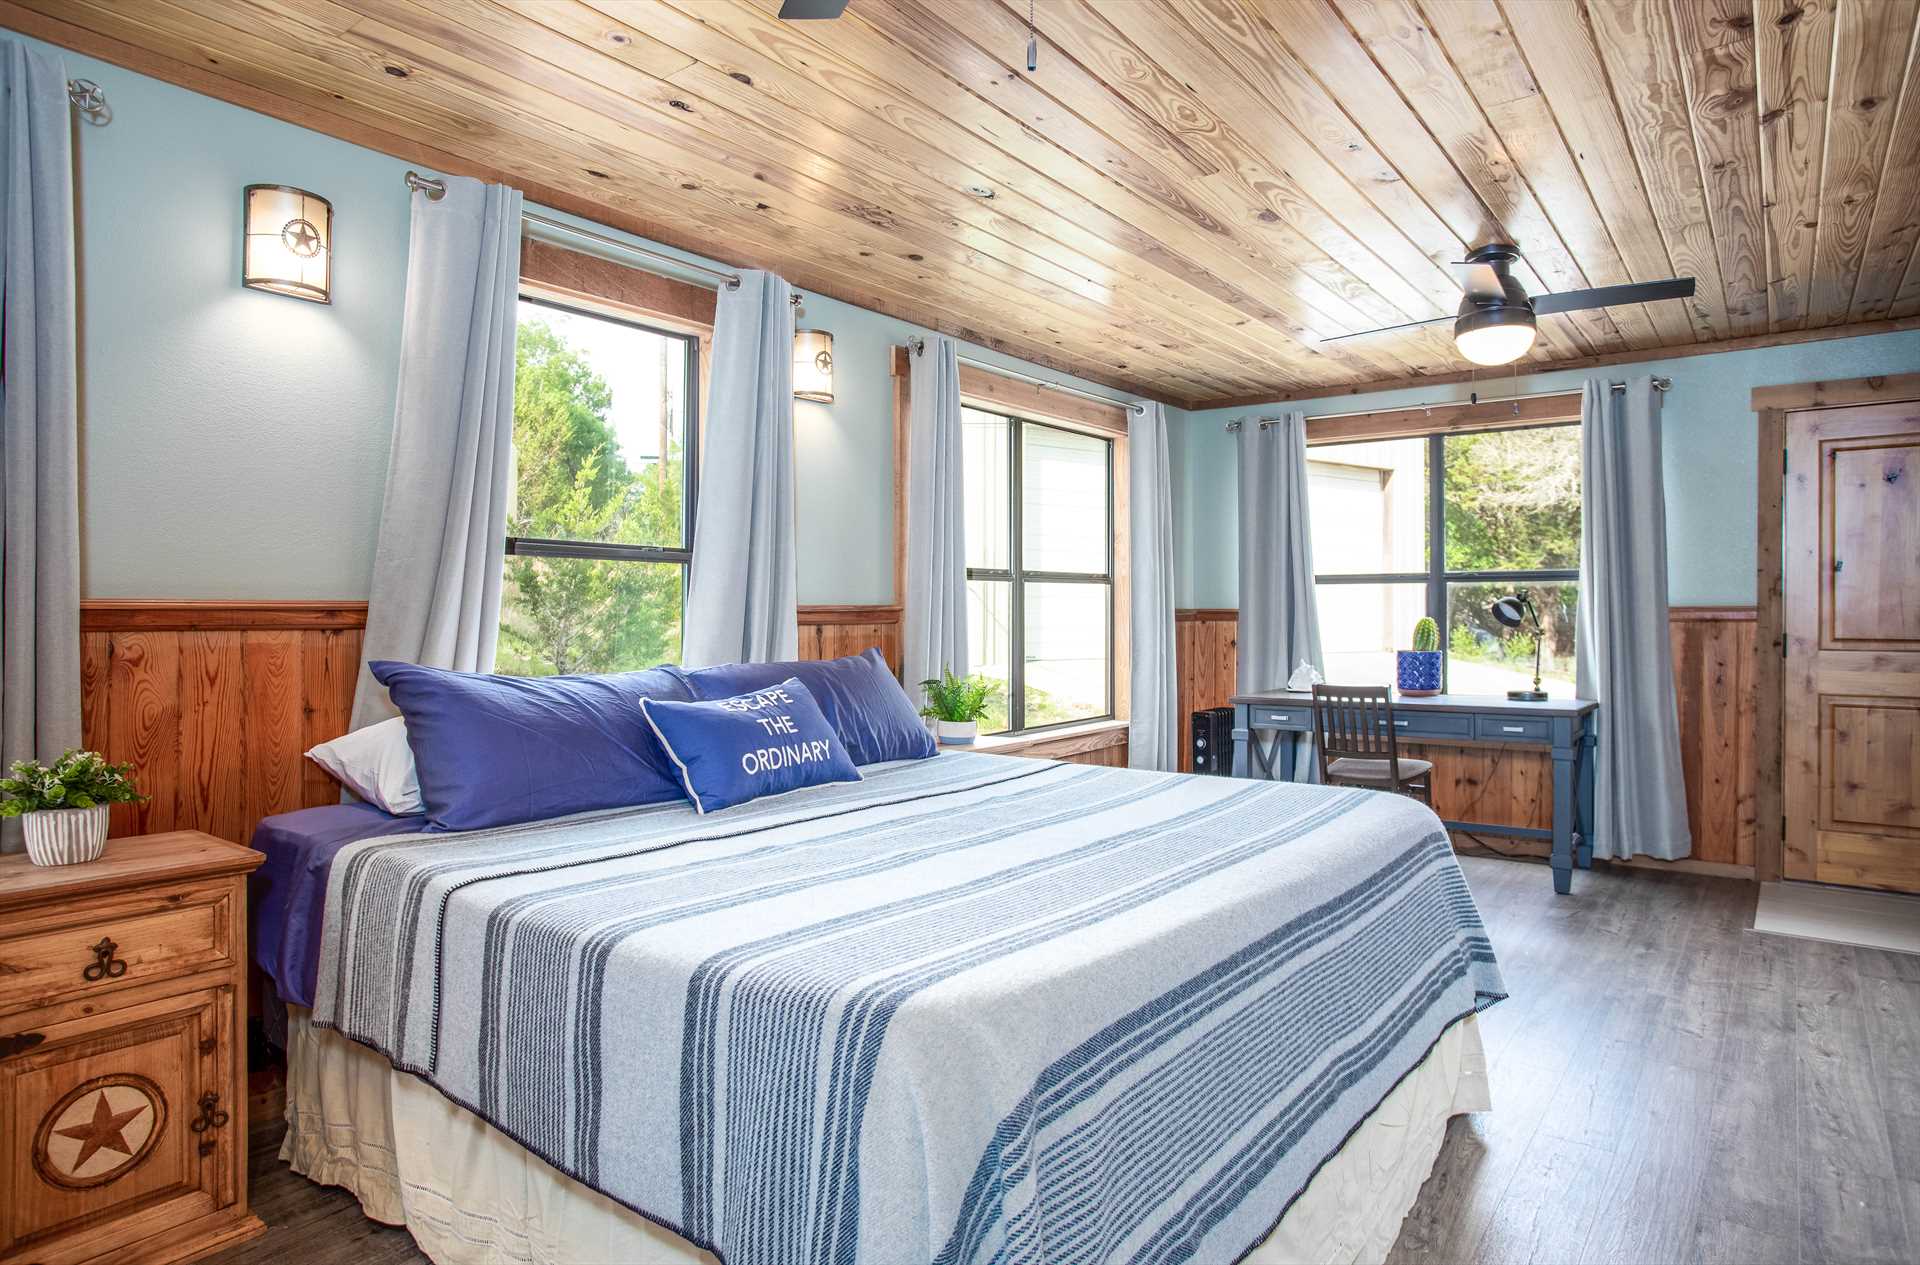                                                 All the sleeping spaces at the farmhouse come complete with fresh, soft bed linens.